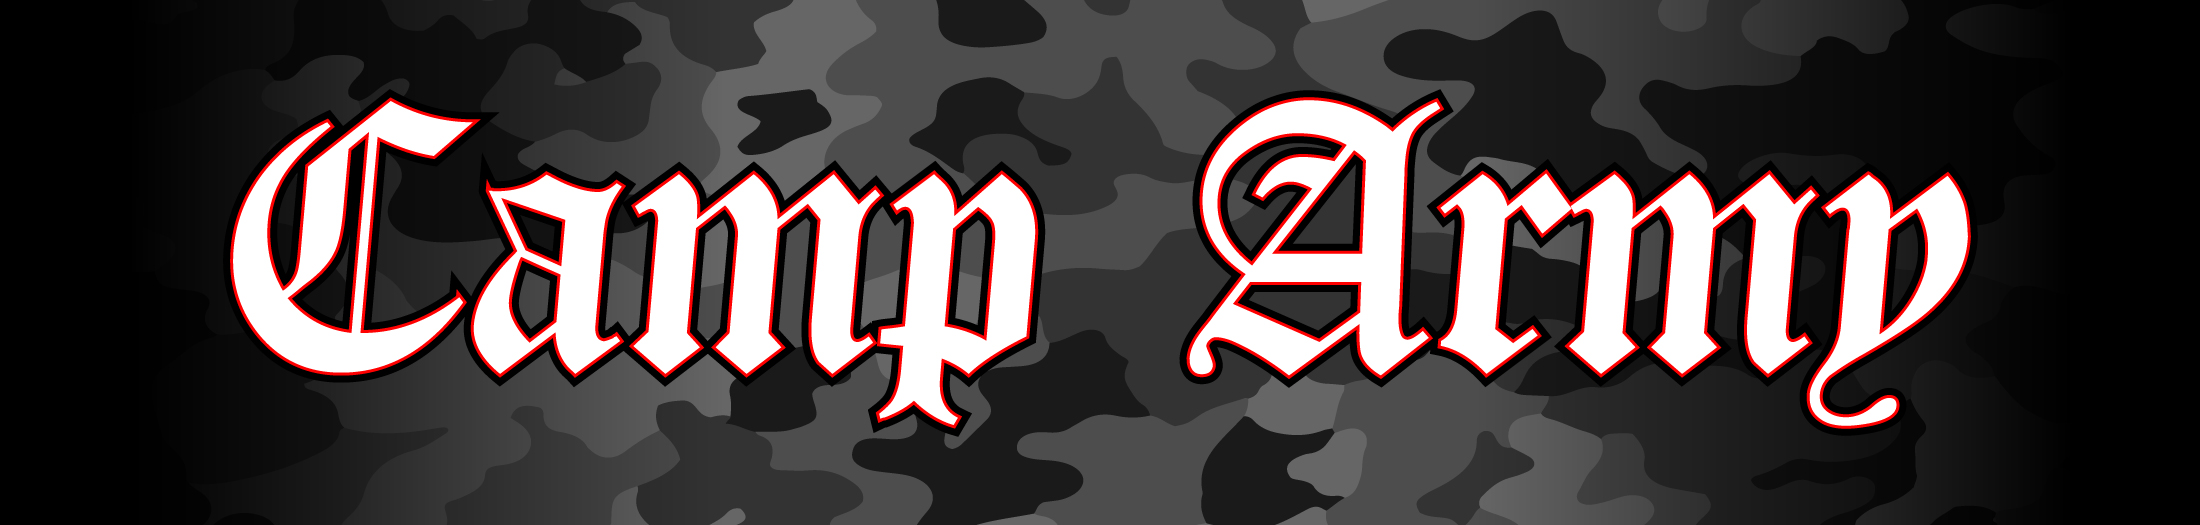 Camp Army banner